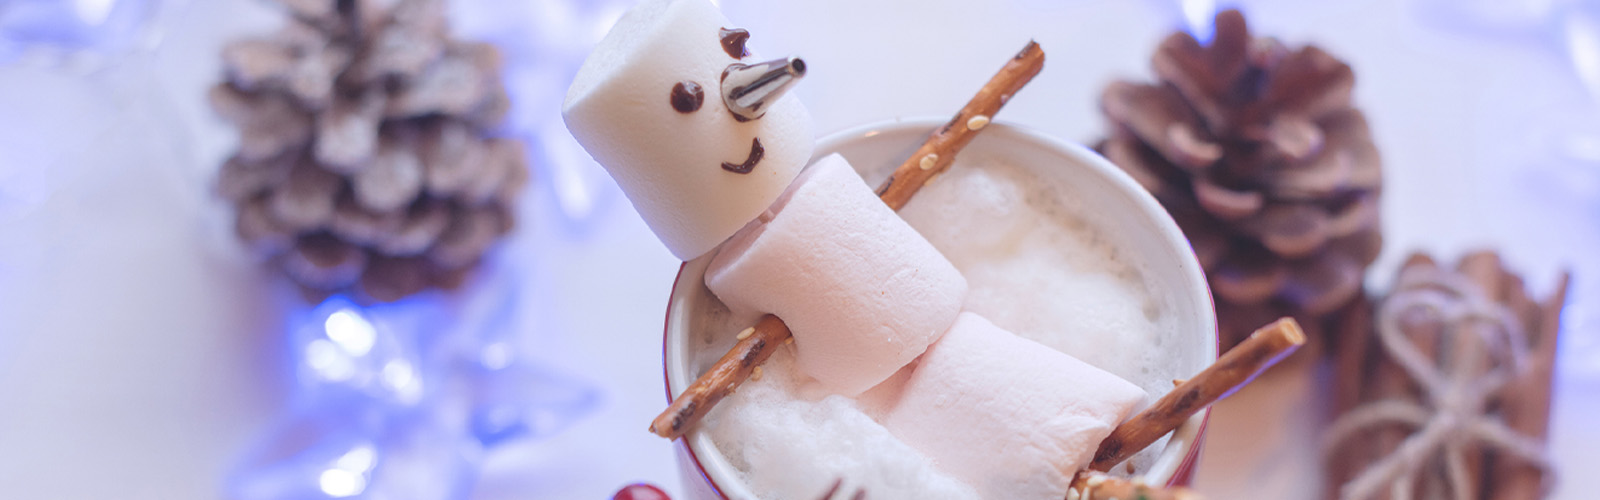 marshmallow snowman laying on top of cup of hot chocolate